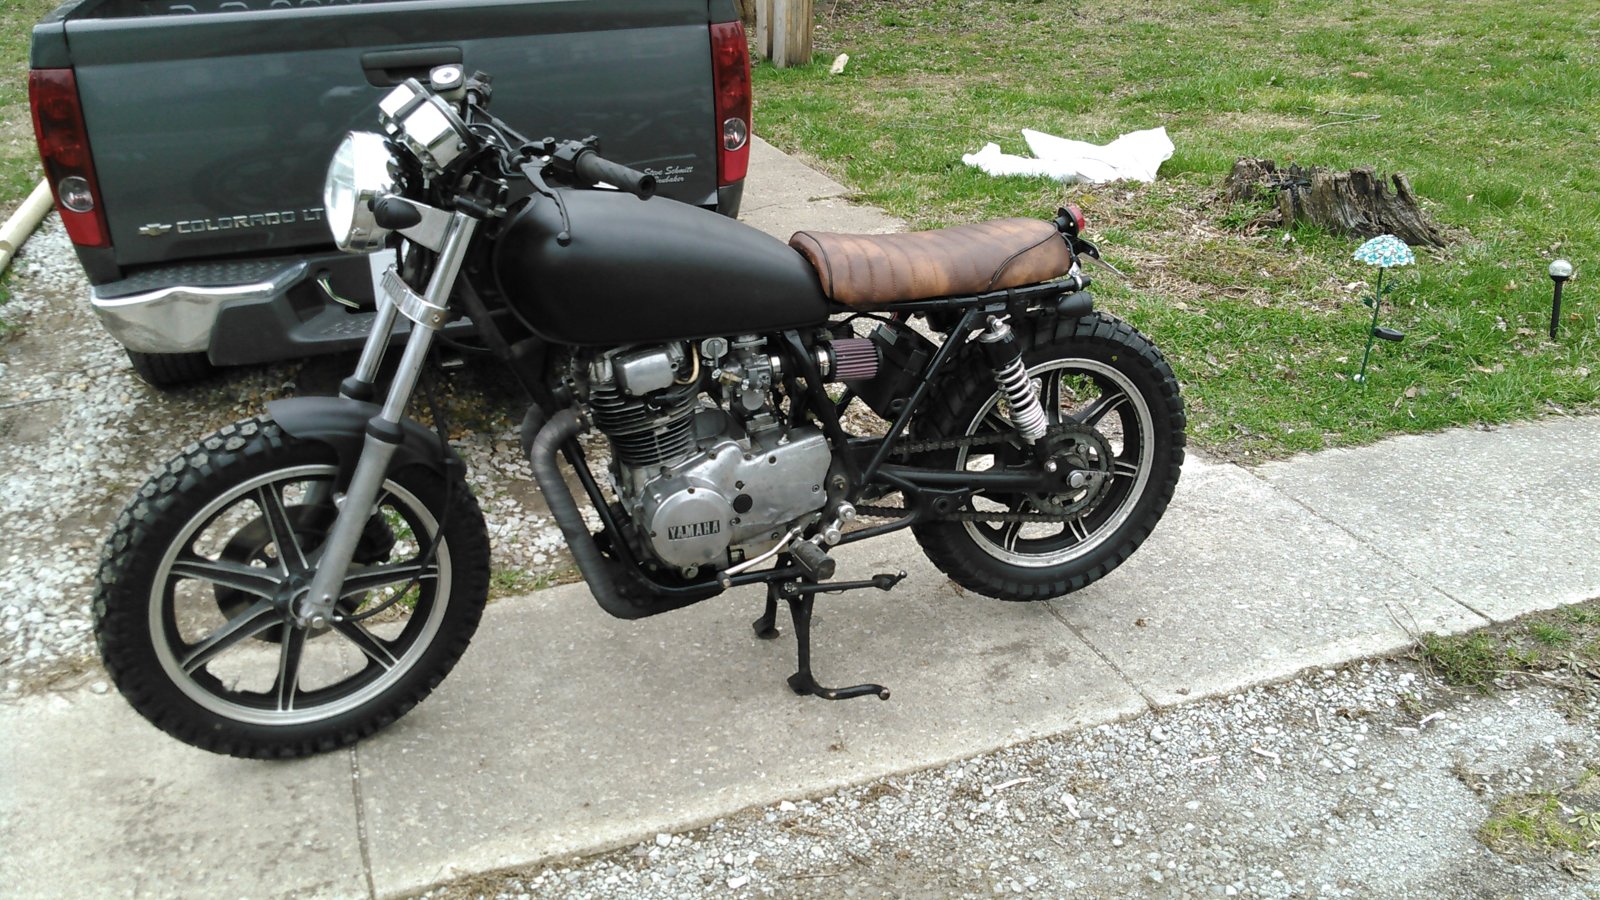 Current state of the XS400 Scrambler project